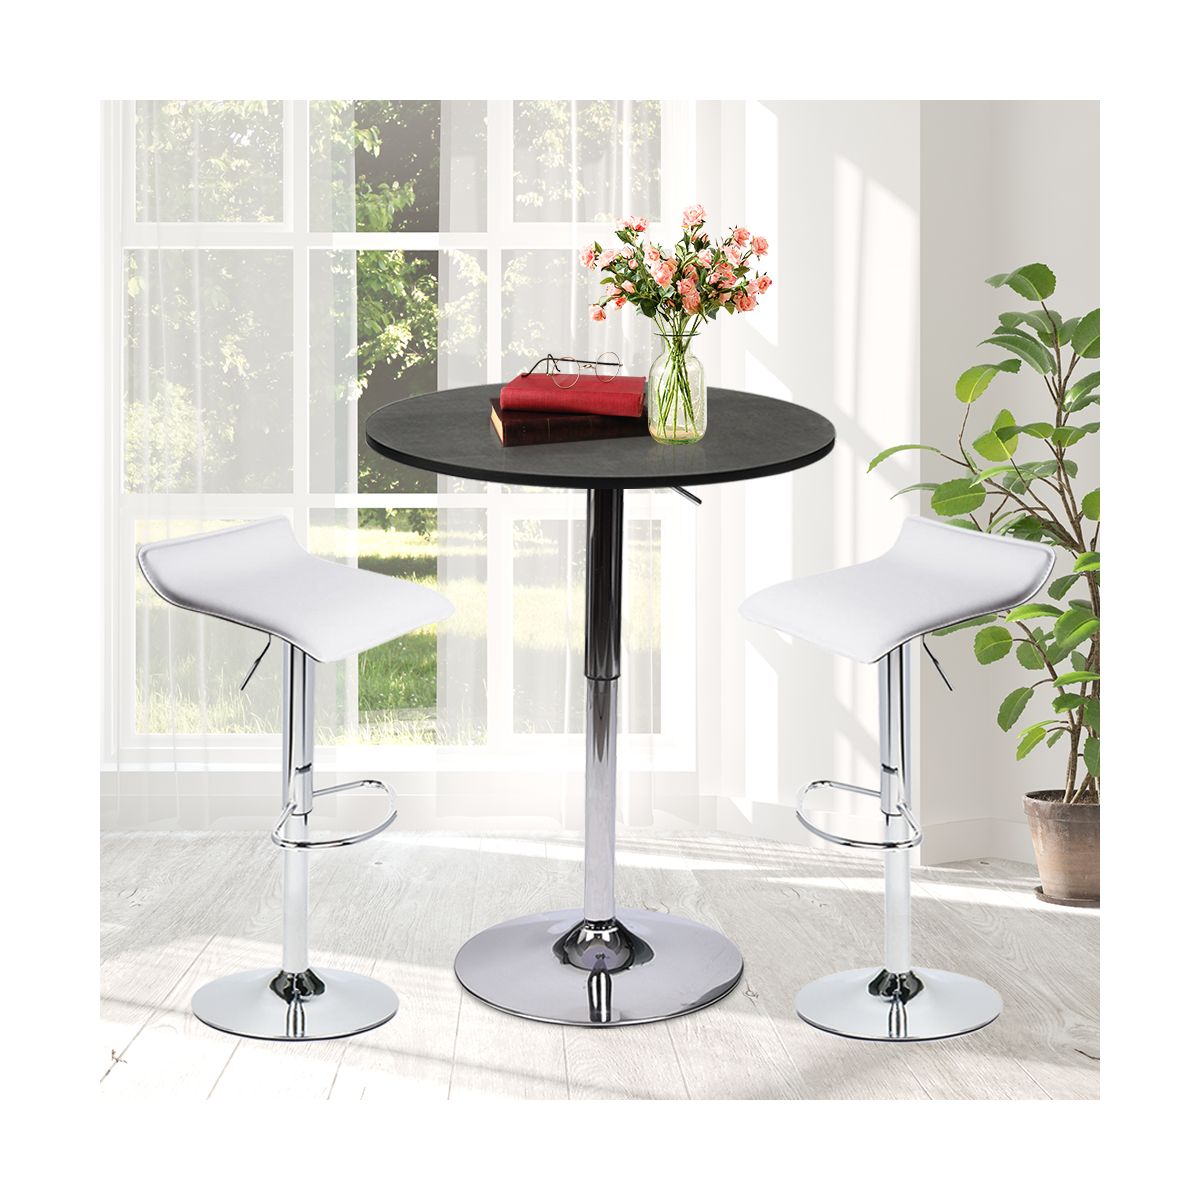 Bar Table Set 3-Piece OW0302 black bar table and white bar stools display scene